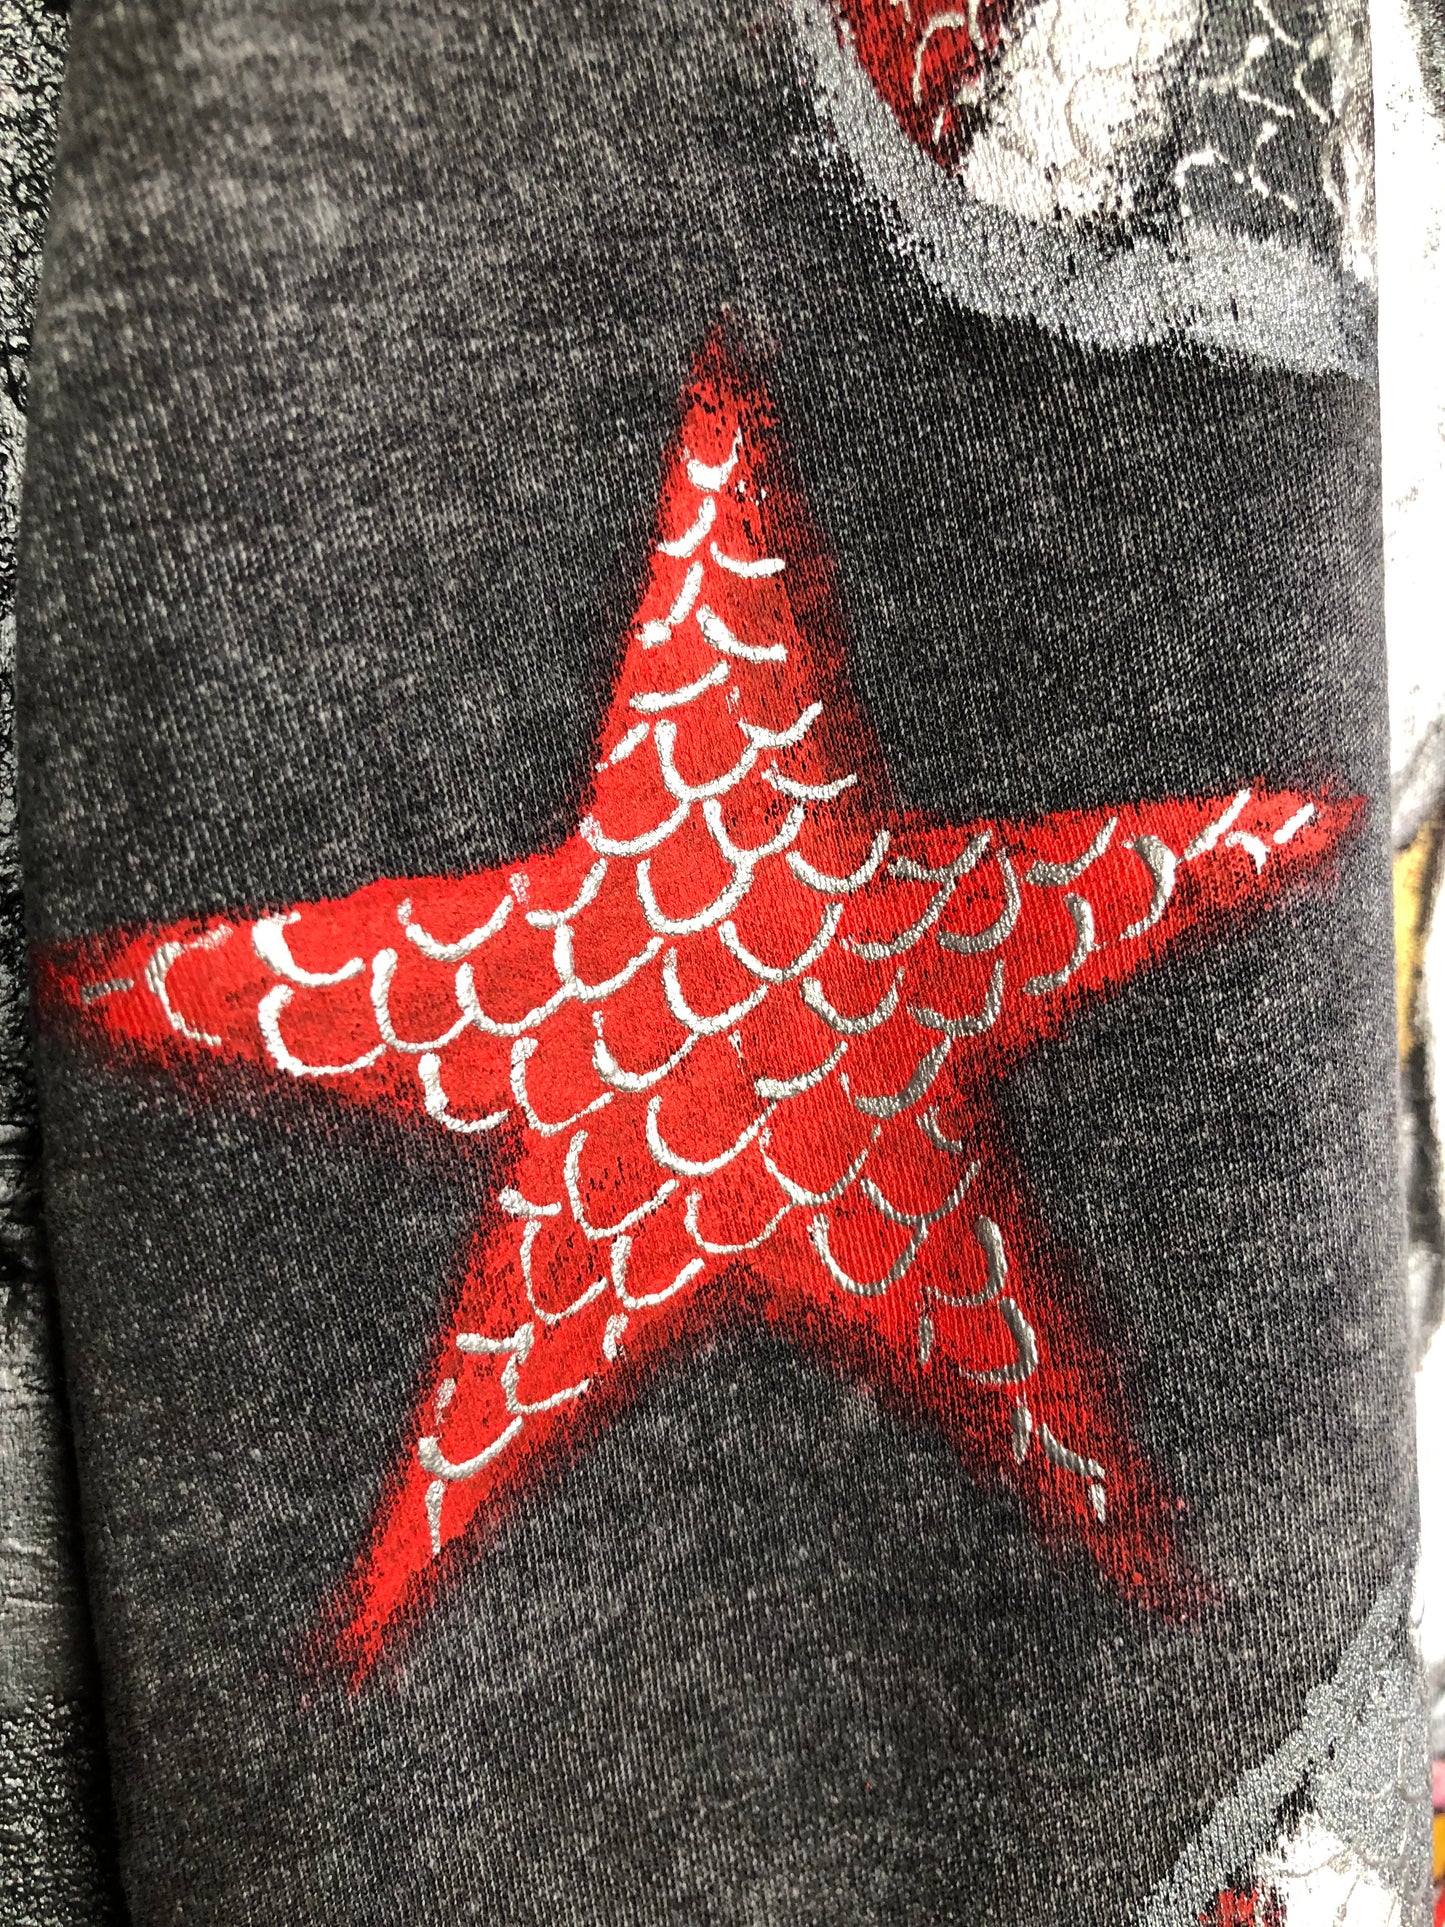 Detailed red star with a painting on a t-shirt